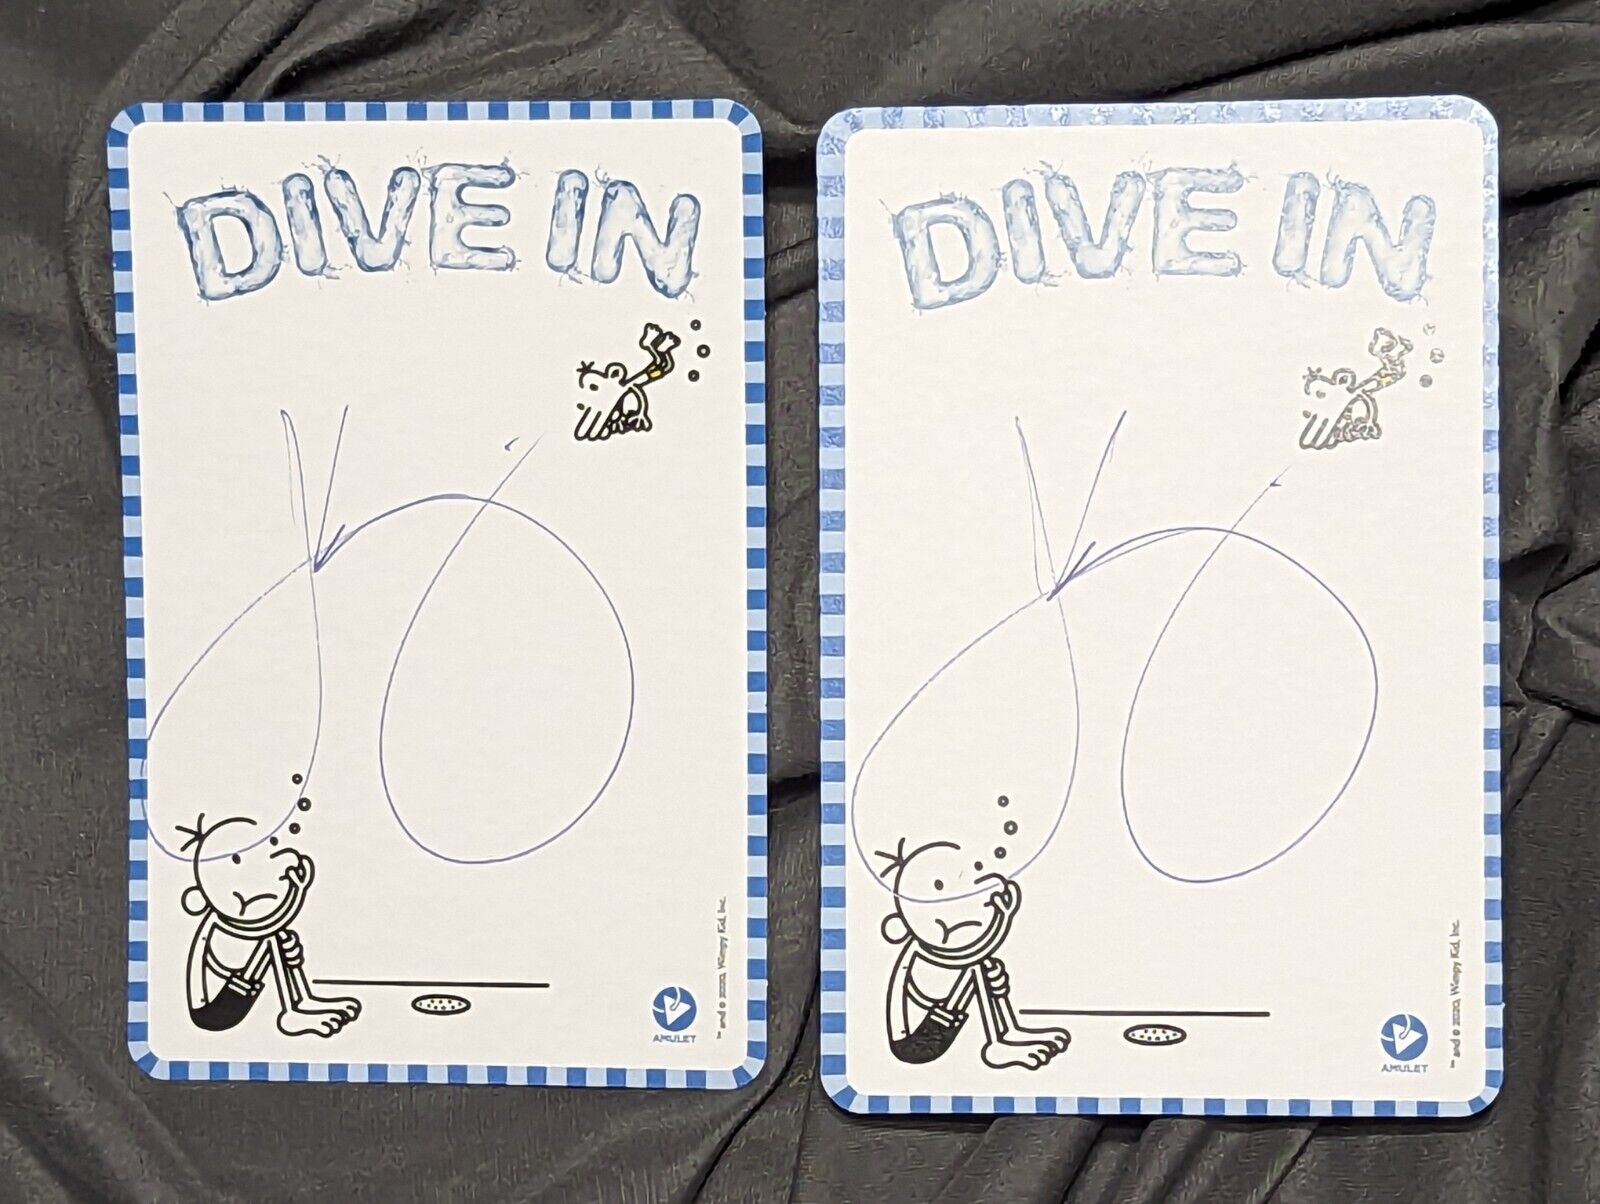 BOGO Jeff Kinney Autographs Diary of a Wimpy kid author signed